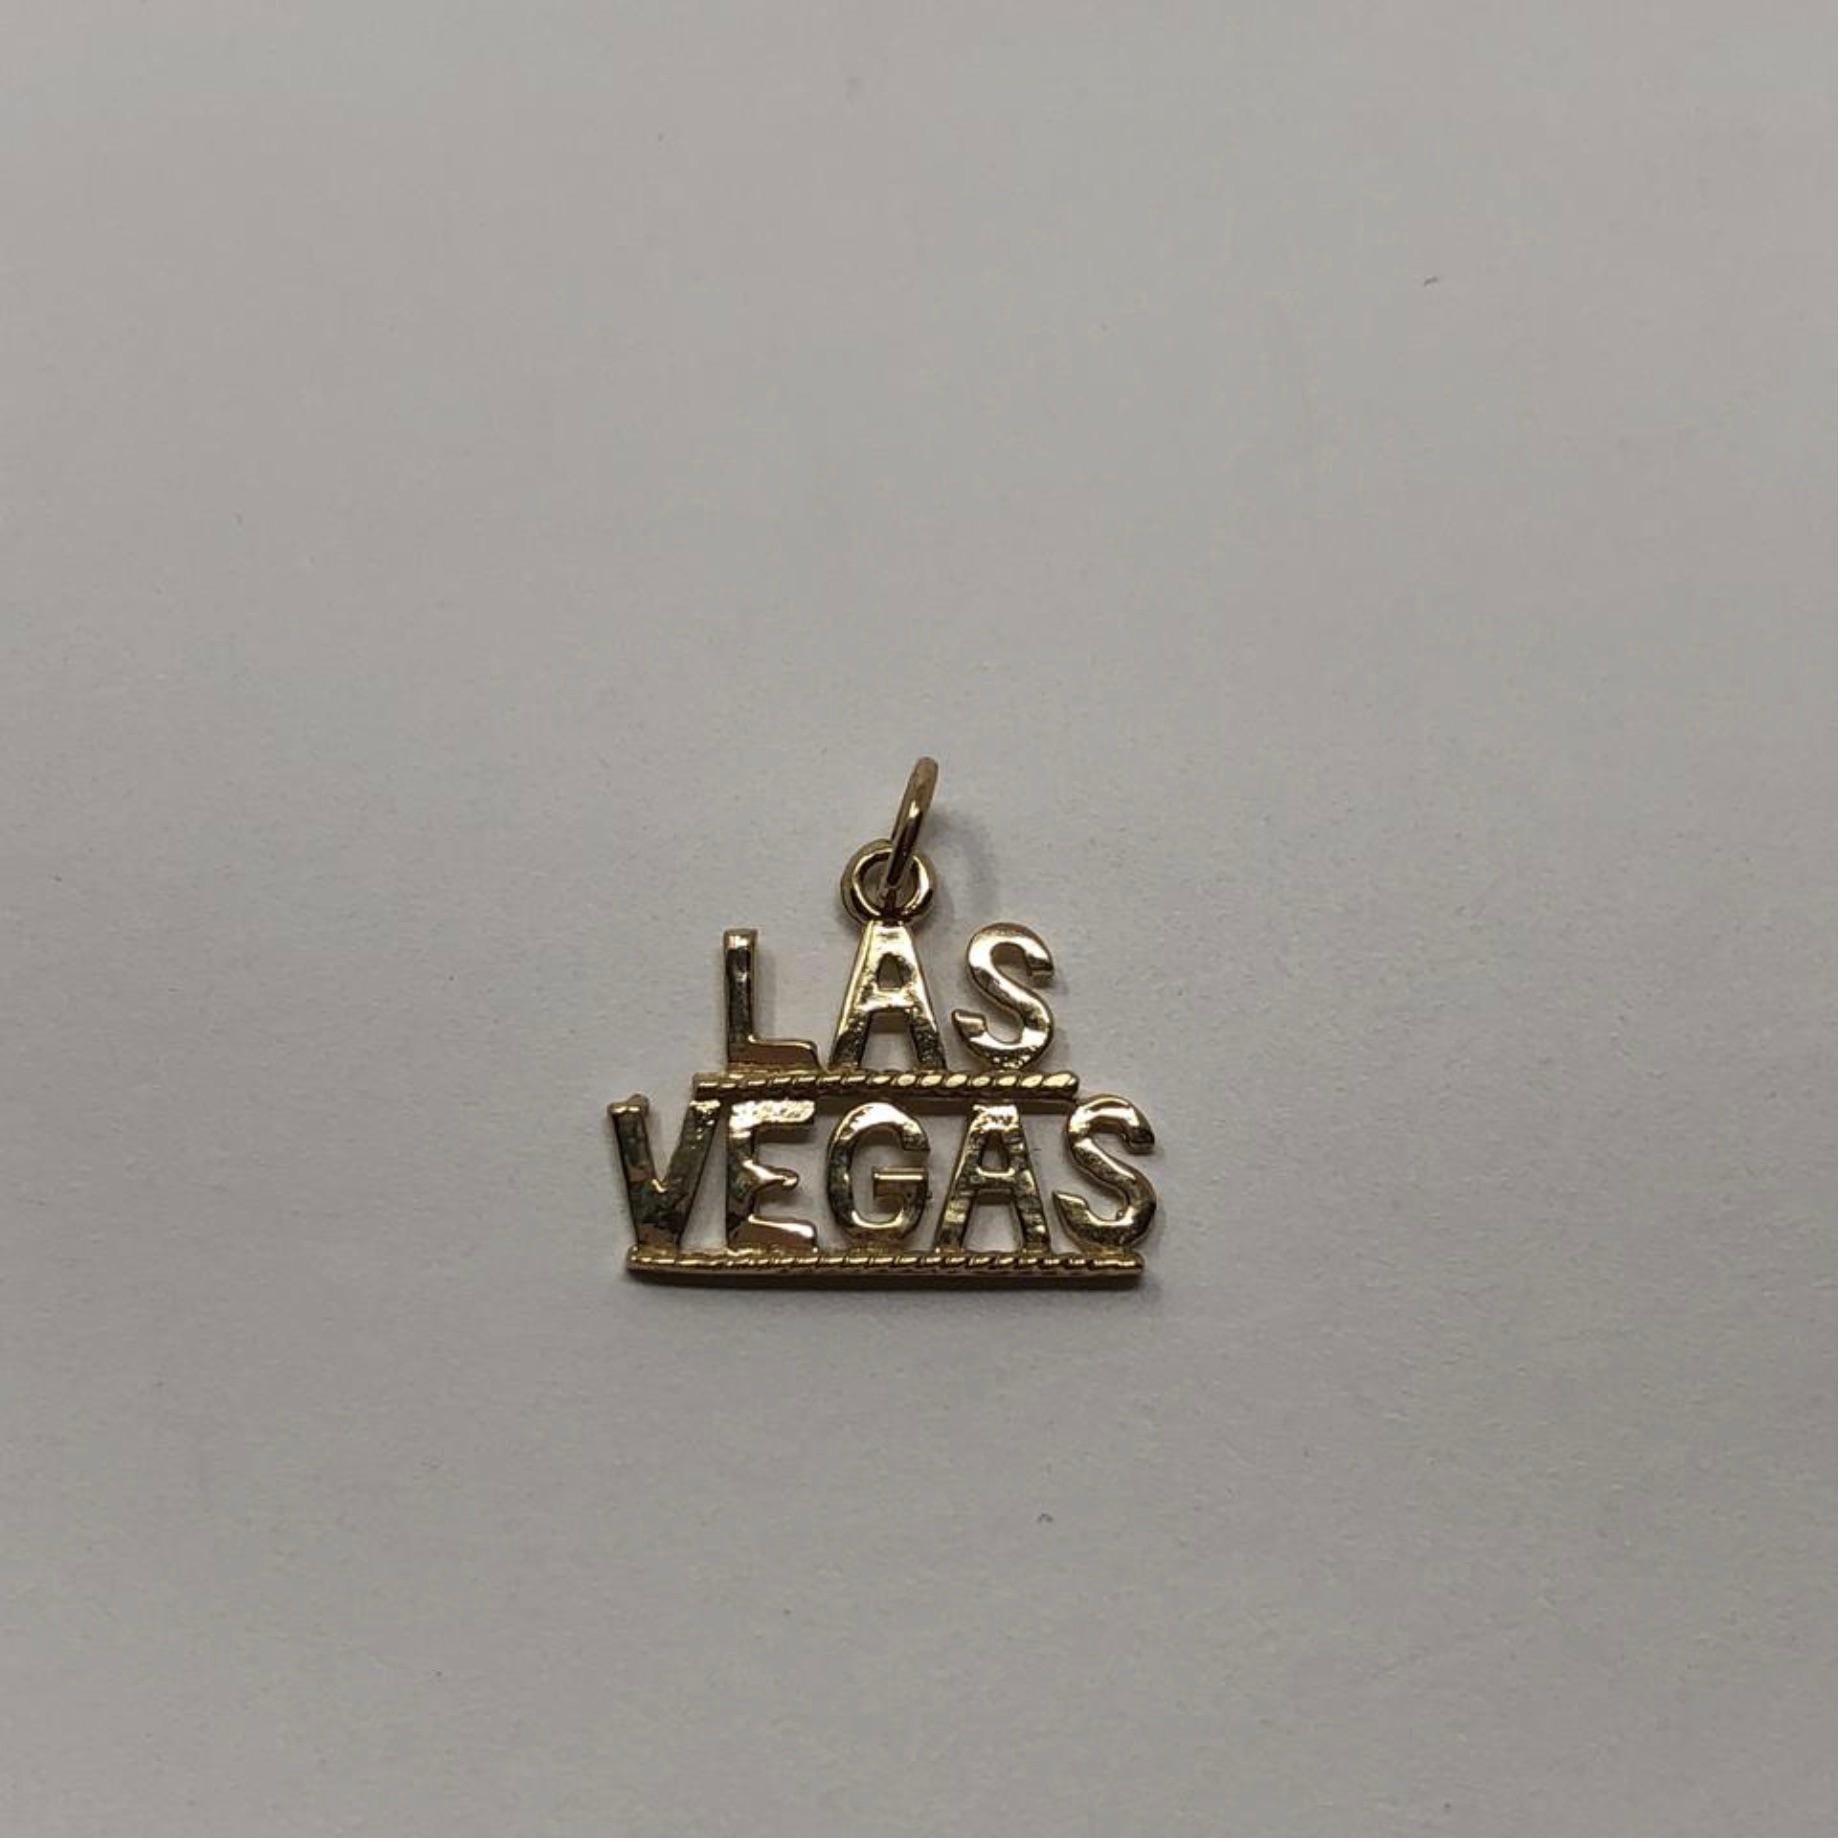 MODEL - Vintage 14k Gold Las Vegas Pendent Charm

CONDITION - Exceptional! No signs of wear.

SKU - 2384-FL

ORIGINAL RETAIL PRICE - 175 + tax

MATERIAL - 14k Gold

WEIGHT - 1.5 grams

DIMENSIONS - L.75 x H.7 (.75 with bail) x D.1

COMES WITH - No